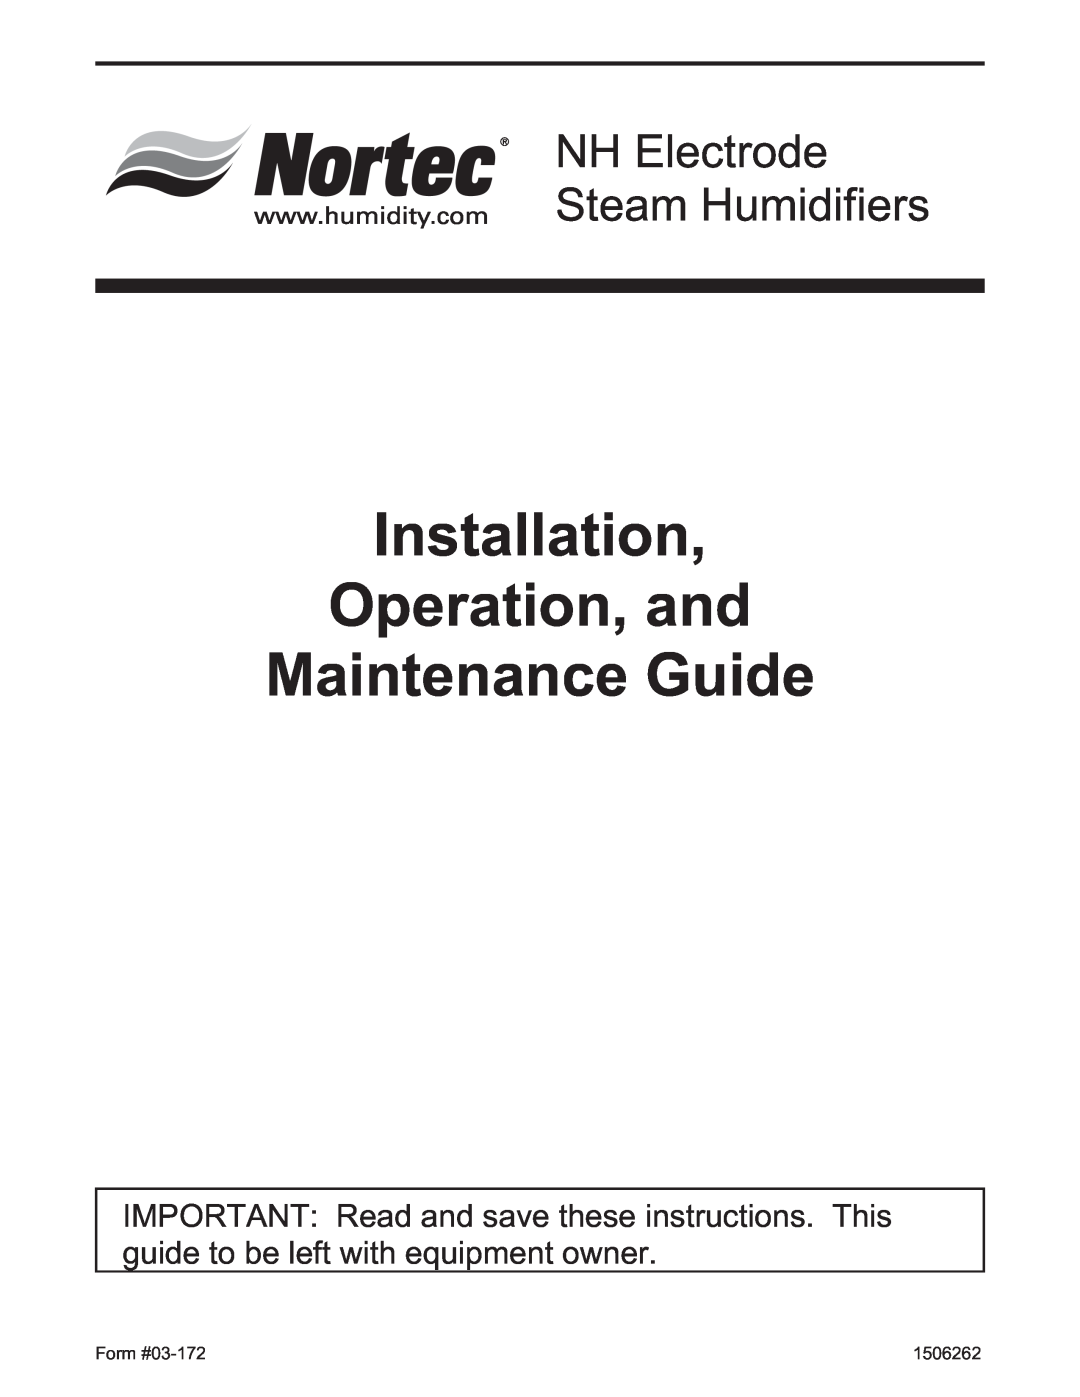 Nortec 132-3091 manual Installation Operation, and Maintenance Guide, NH Electrode Steam Humidifiers 